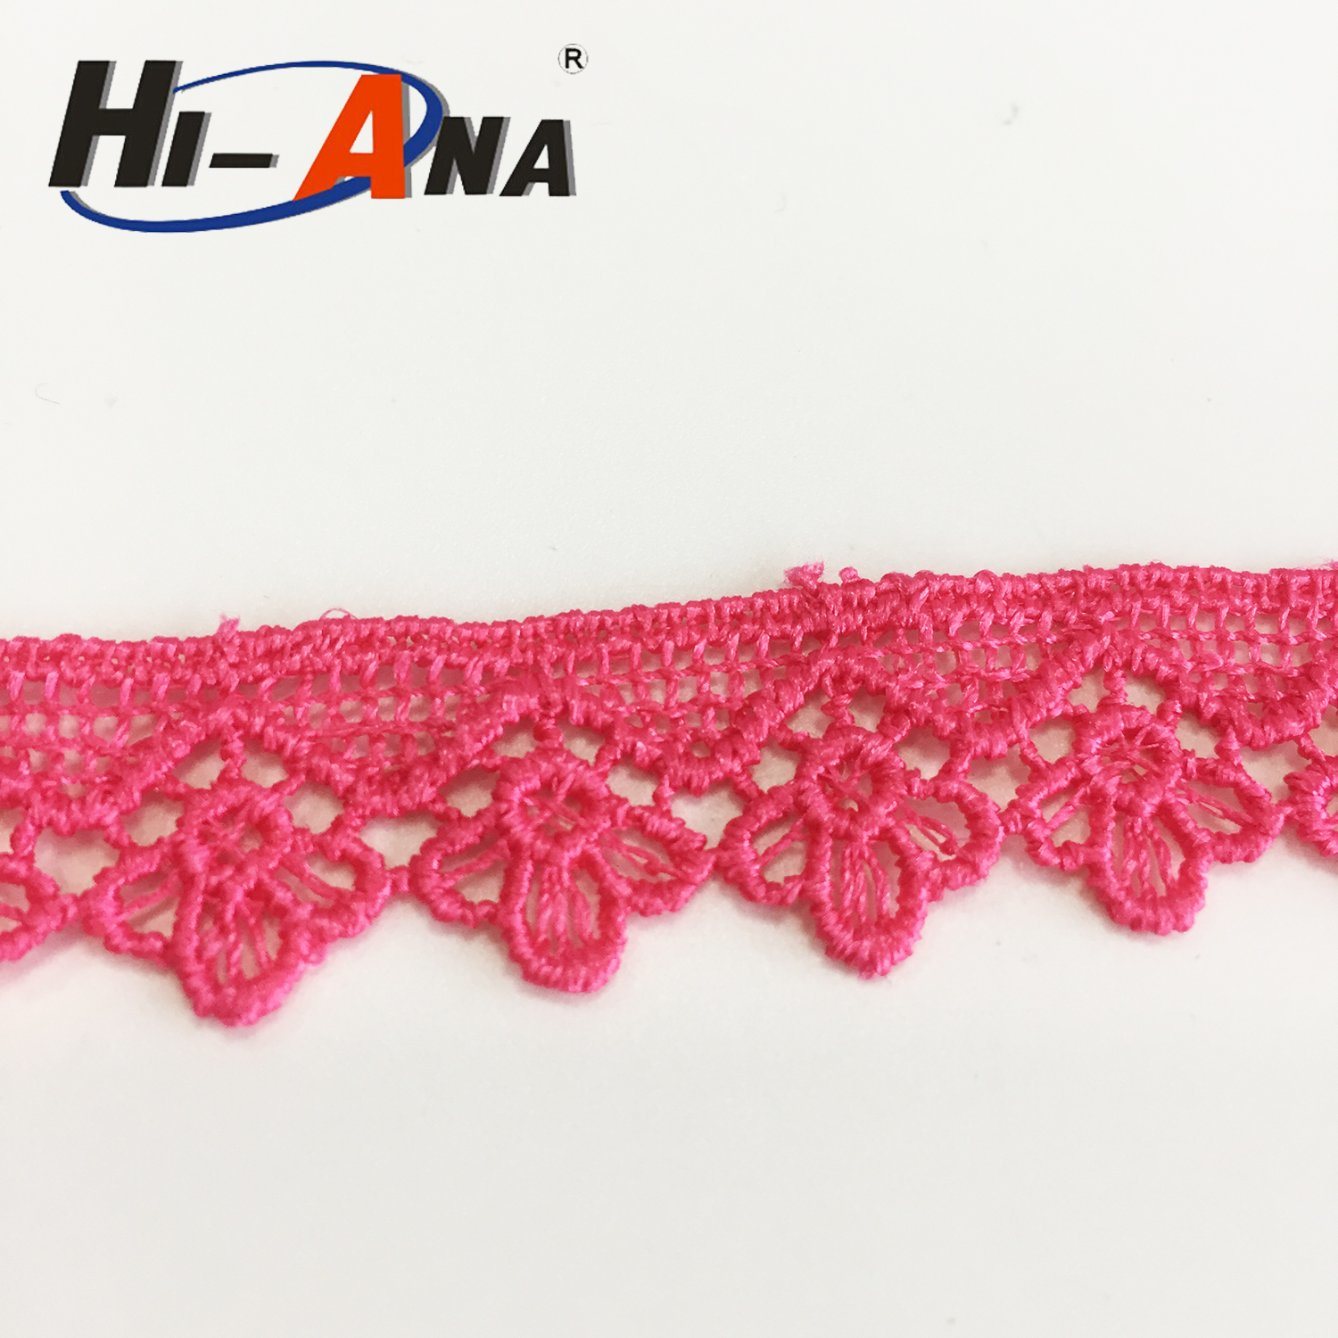 2015 Fashion Colored Cheap Polyester Chemical Lace